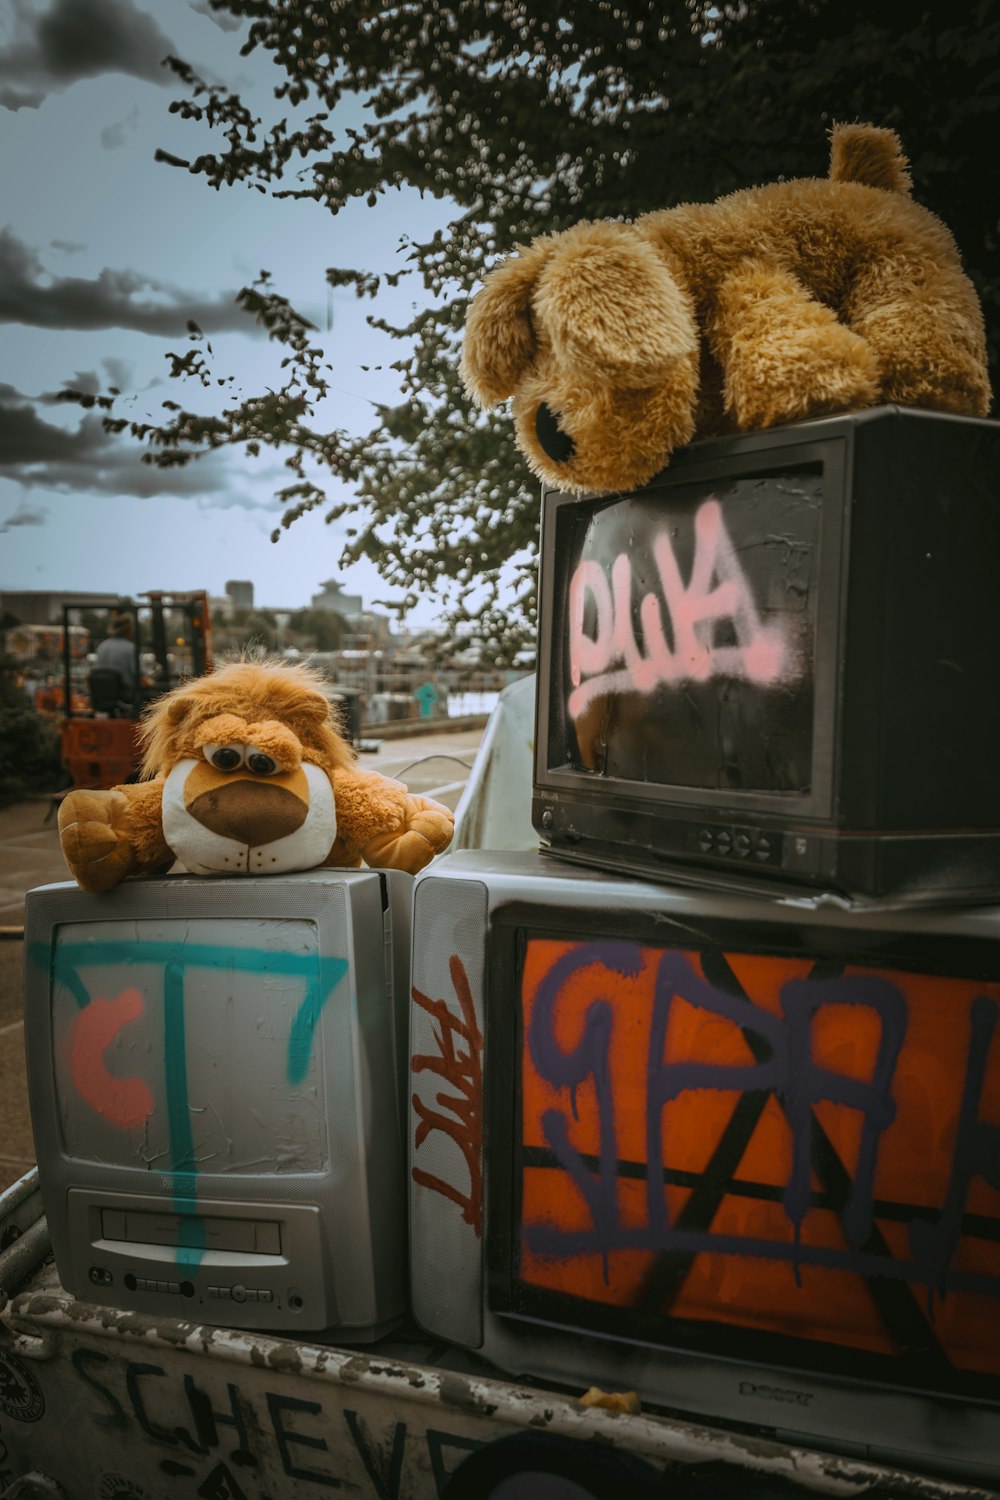 brown dog plush toy on top of black CRT TV